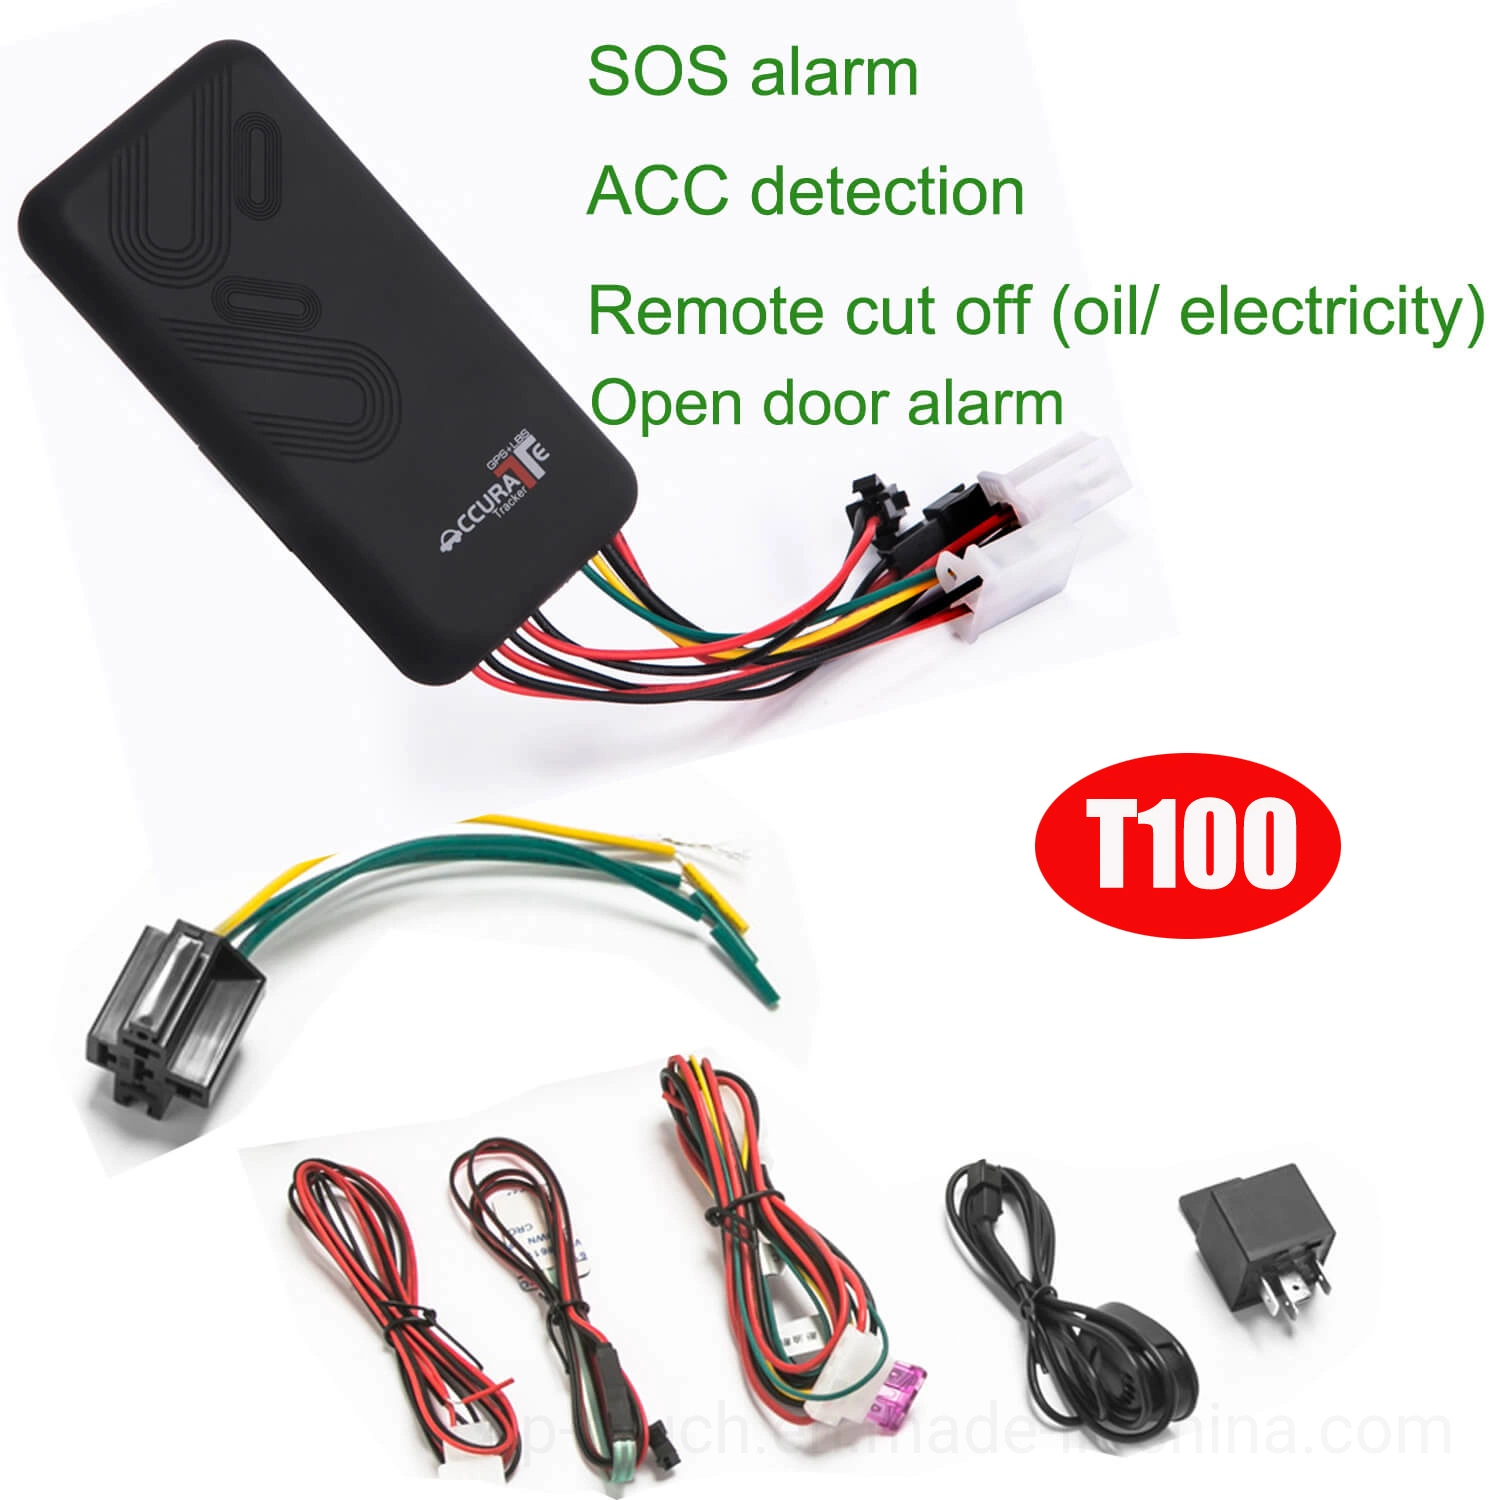 New Arrival Anti Theft Hot Sell GSM Car GPS Tracker for Motorcycle Vehicle with ACC Detection Engine Cut Remotely T100